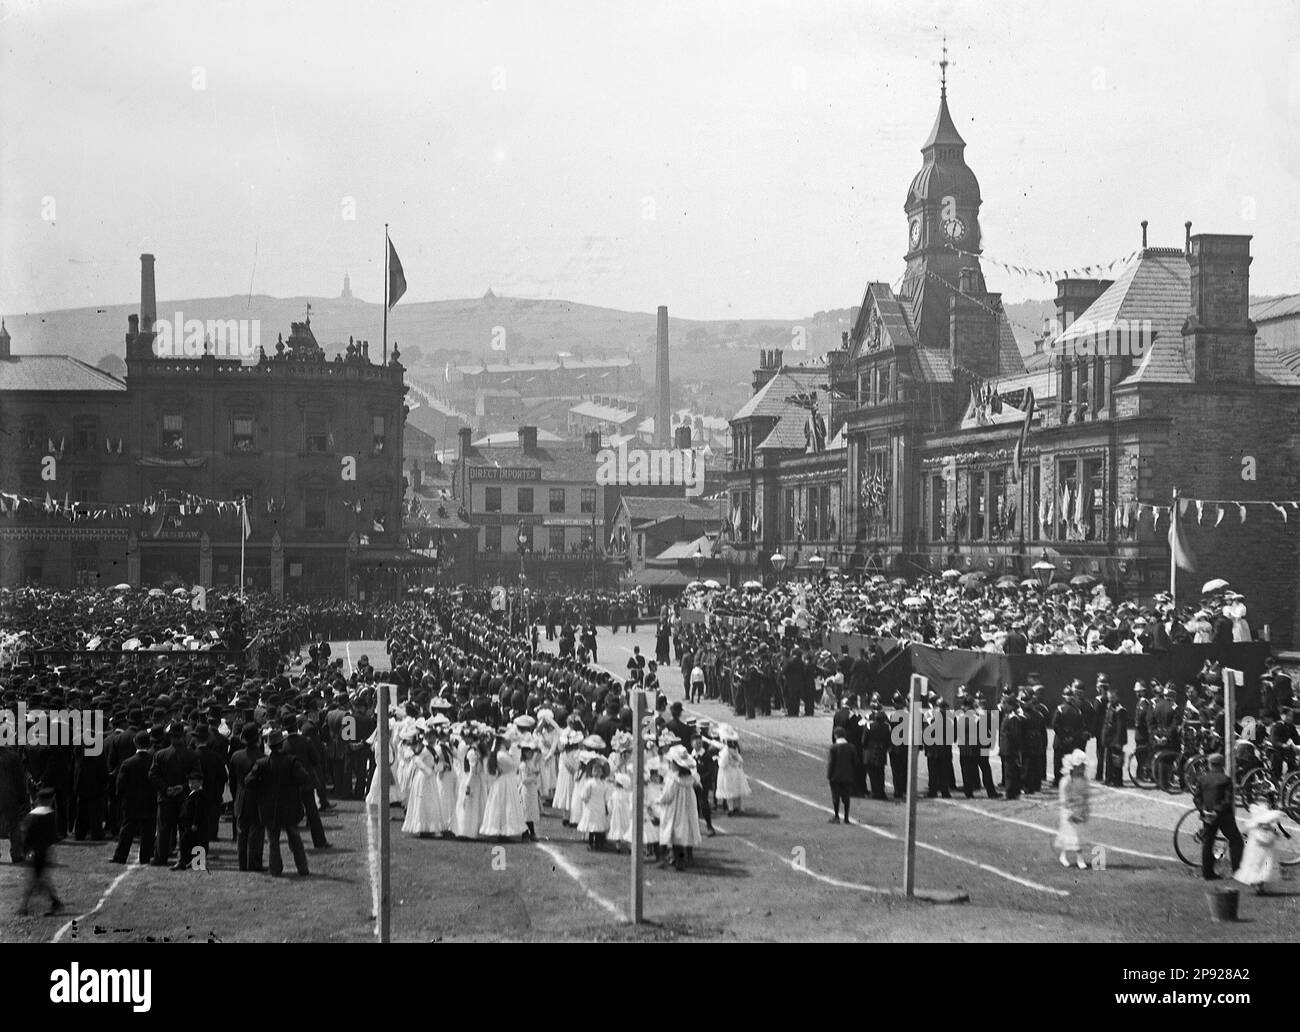 Around the UK - Preparation & events relating to the Coronation of King Edward VII in 1902 Stock Photo